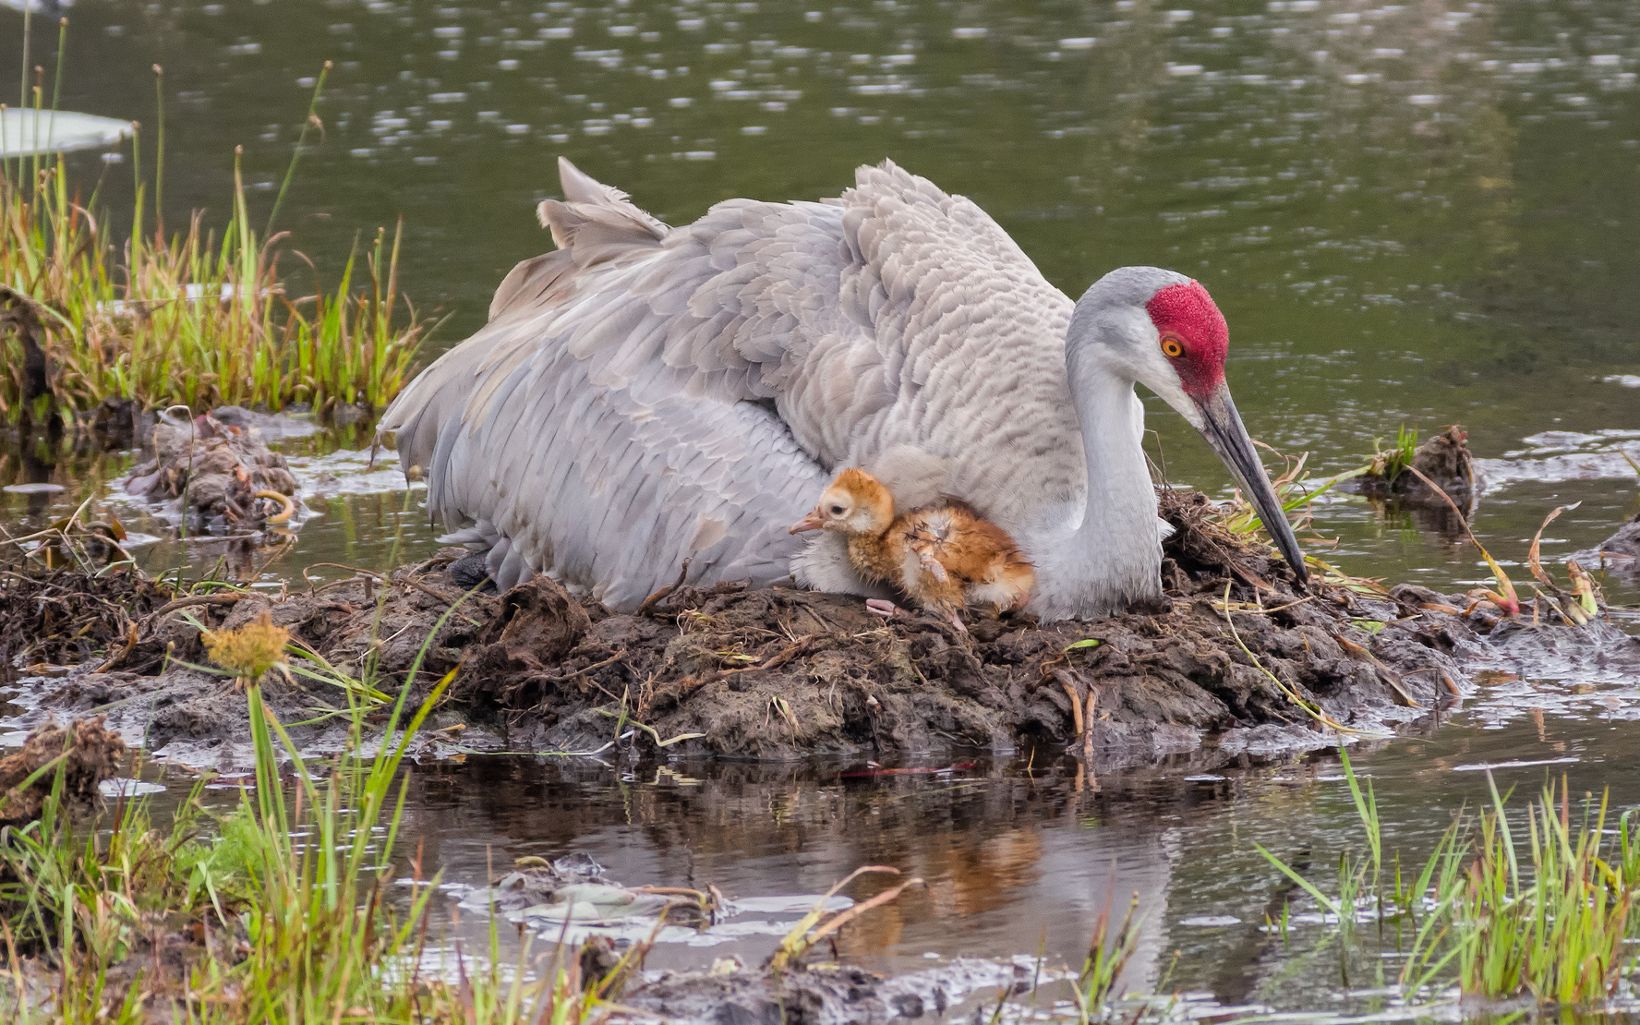 Sandhill Crane and Chick The preserve also supports a variety of birds including migratory and nesting ducks, geese, trumpeter swans and wading birds like sandhill cranes, which nest there. © Lawrence Crovo, CC BY-ND 2.0